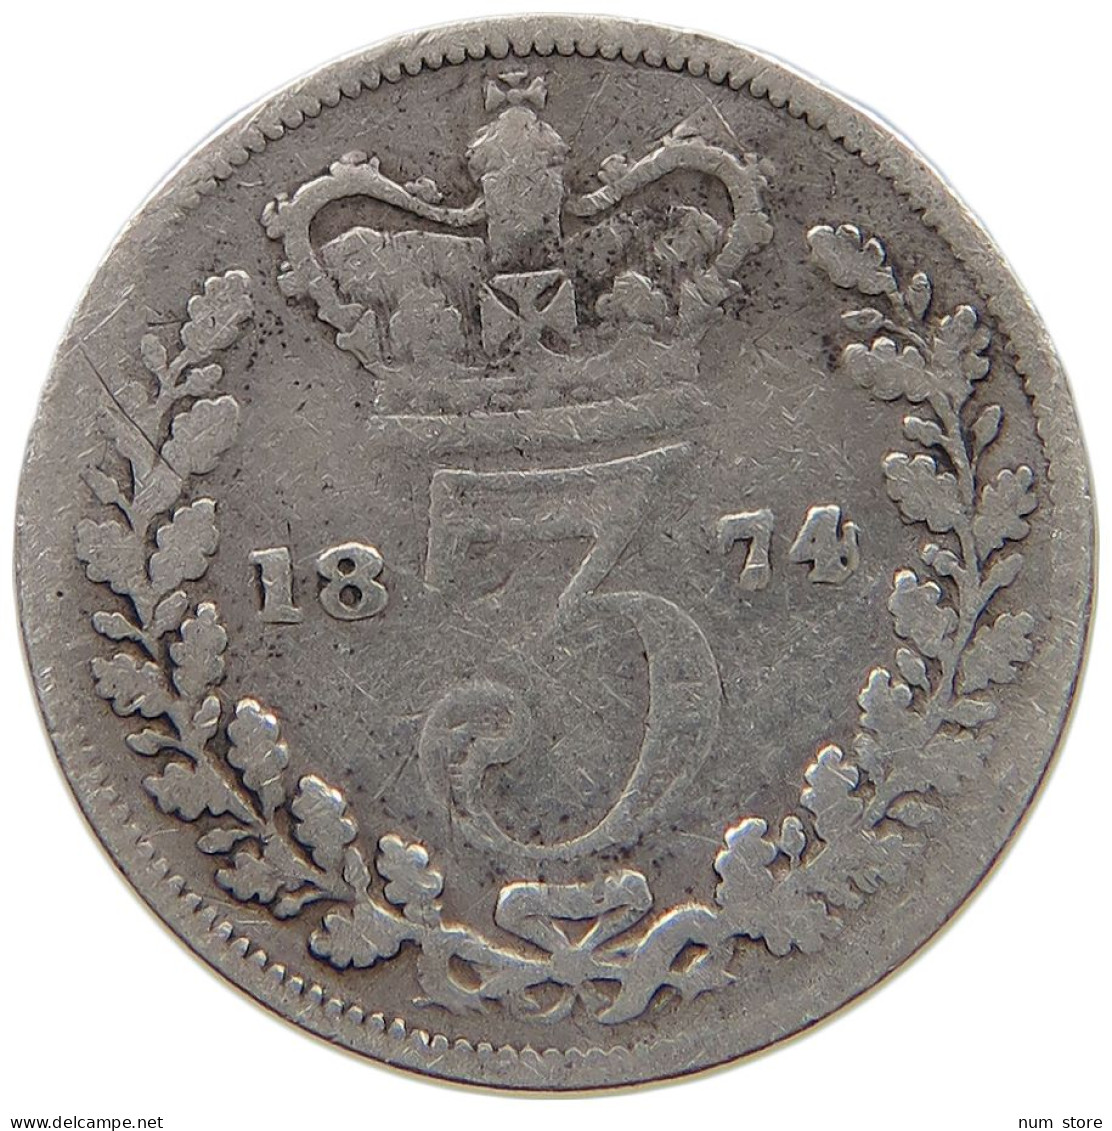 GREAT BRITAIN THREEPENCE 1874 Victoria 1837-1901 #a091 0913 - F. 3 Pence